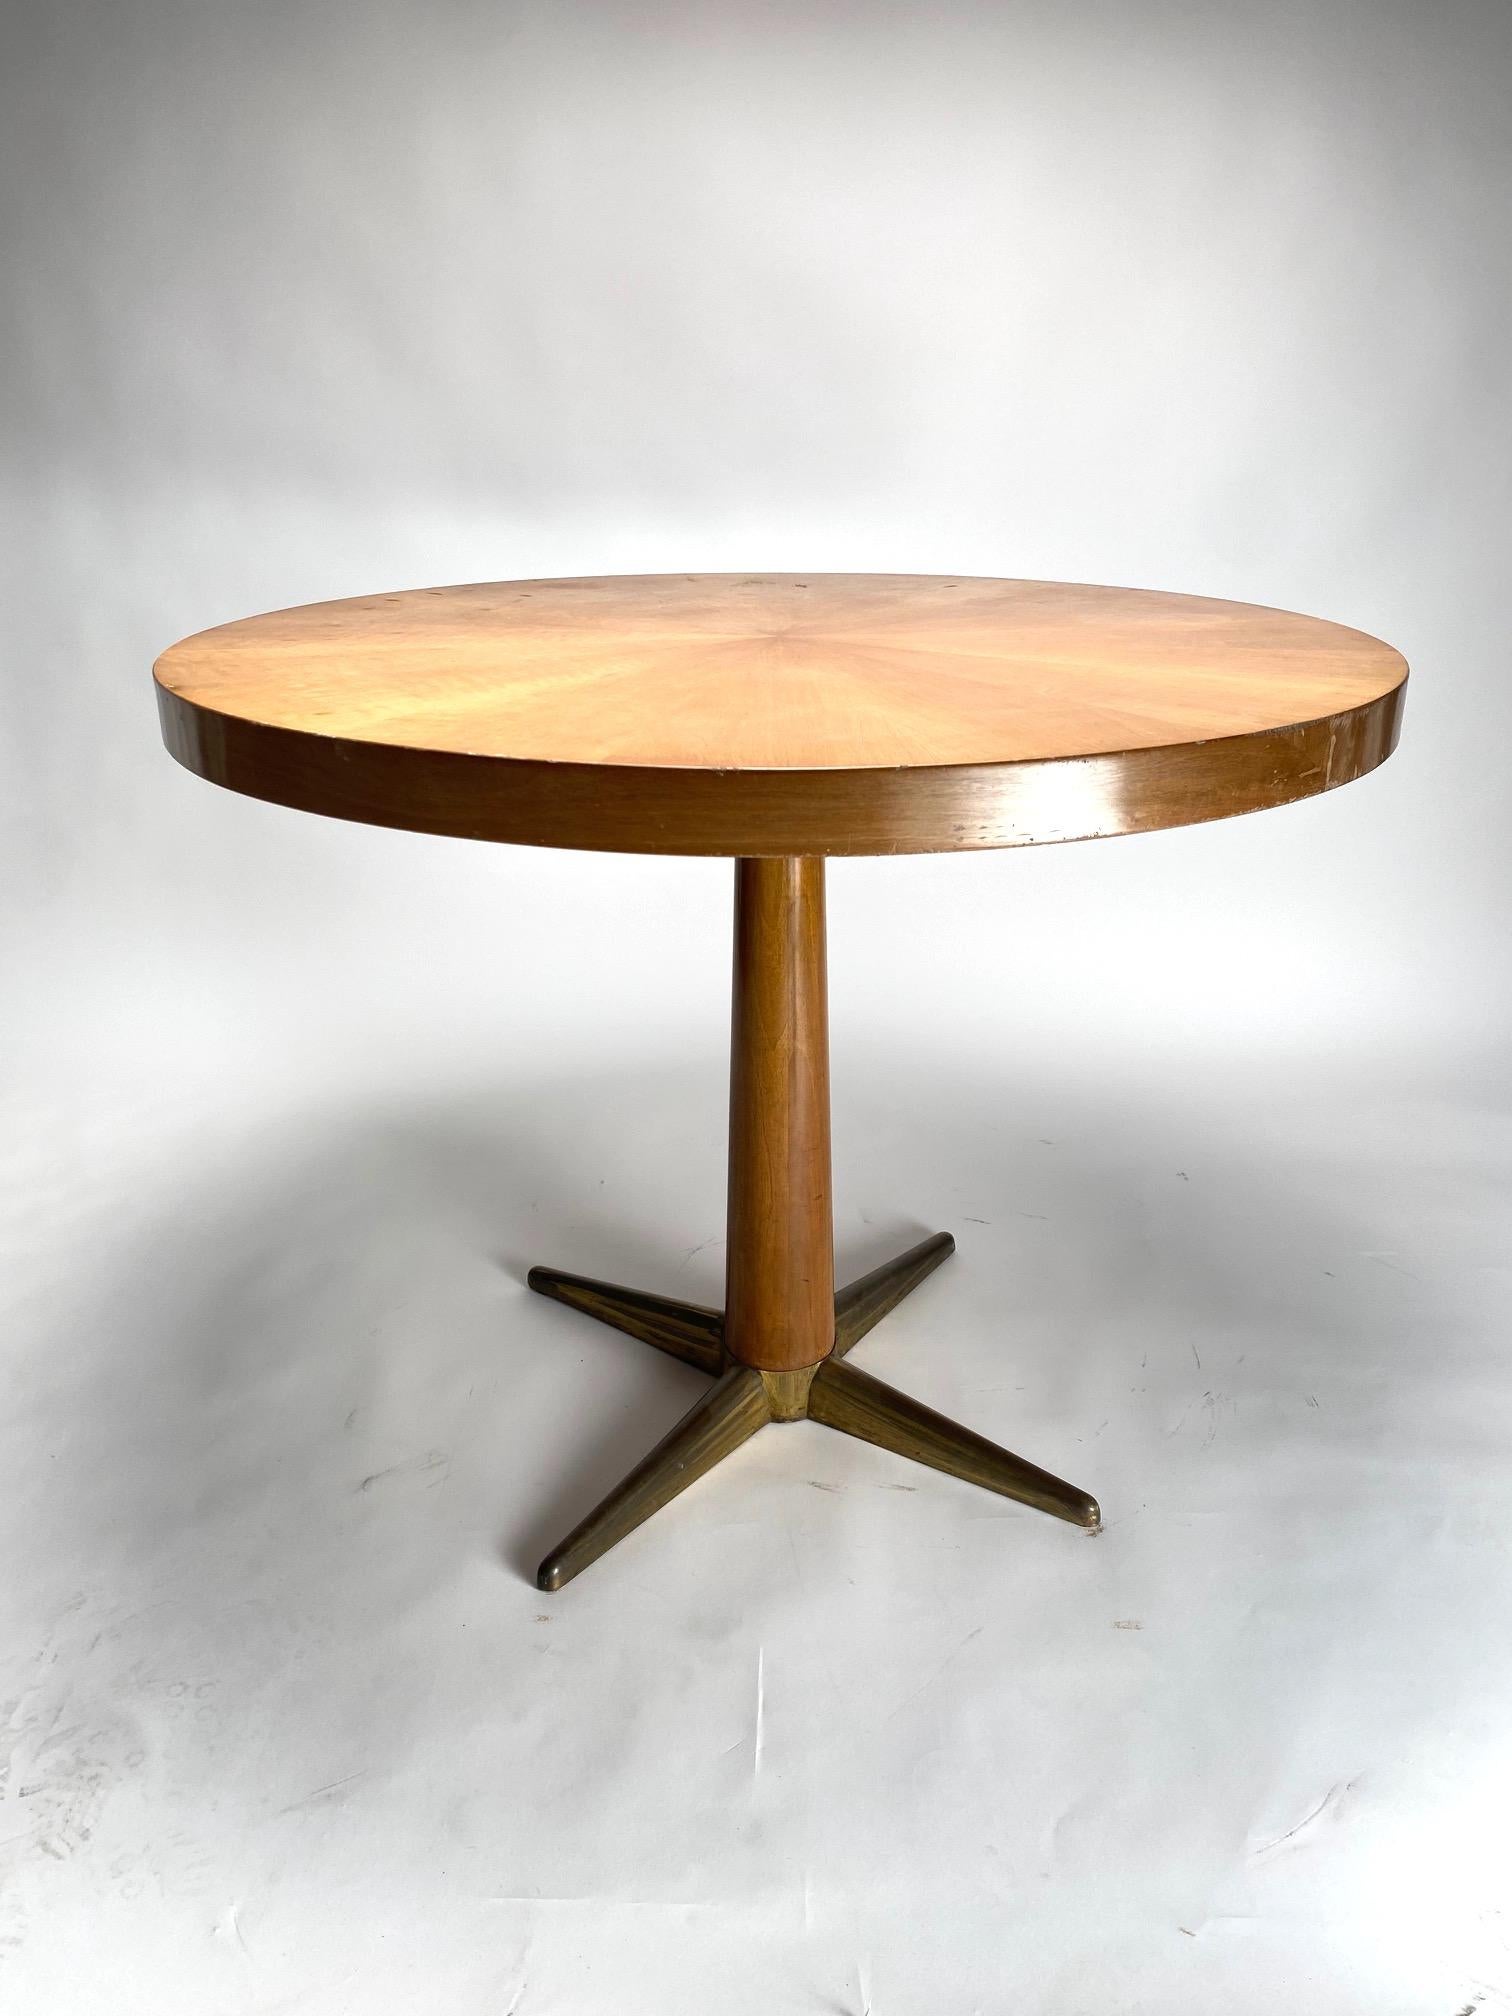 Mid-Century Round Table in wood and brass, Gio Ponti Style, 1950s

Important round wooden table and brass base, coming from an important residence in the center of the city of Bologna. The table, with extremely refined and essential lines, recalls